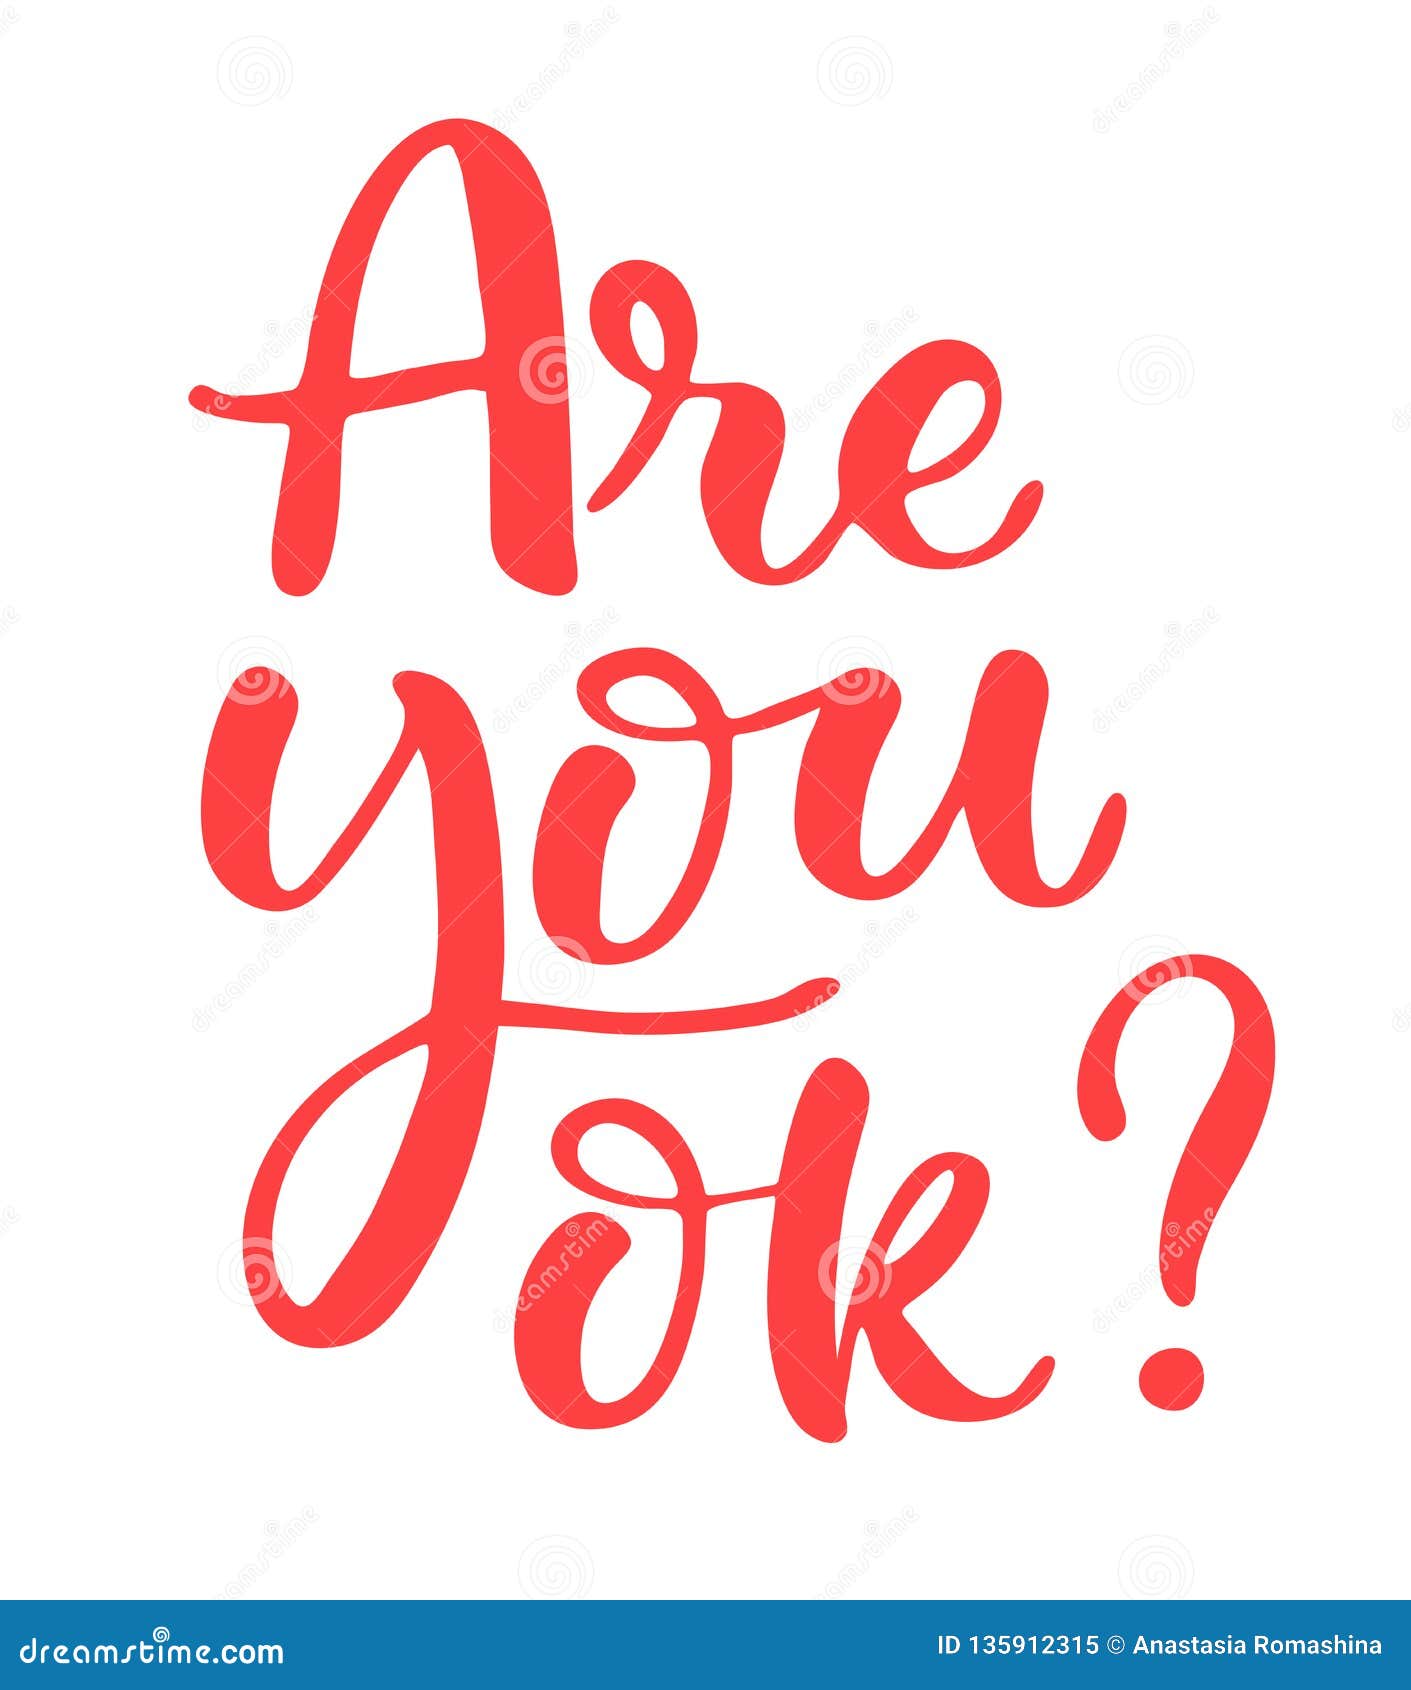 SU's "Are You Ok?" campaign launched on Tuesday